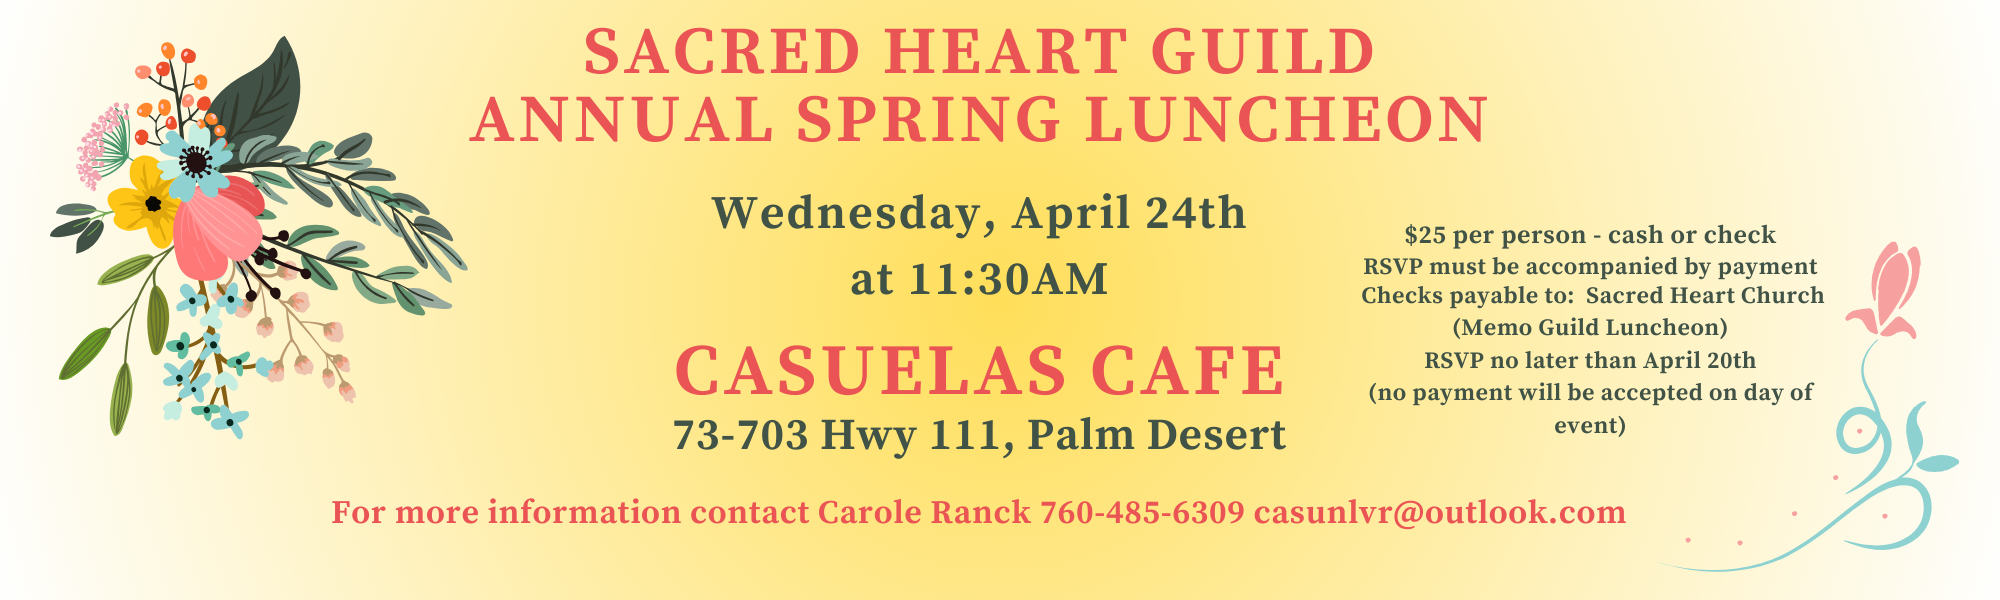 Ladie's Guild Luncheon Wed April 24 11:30AM